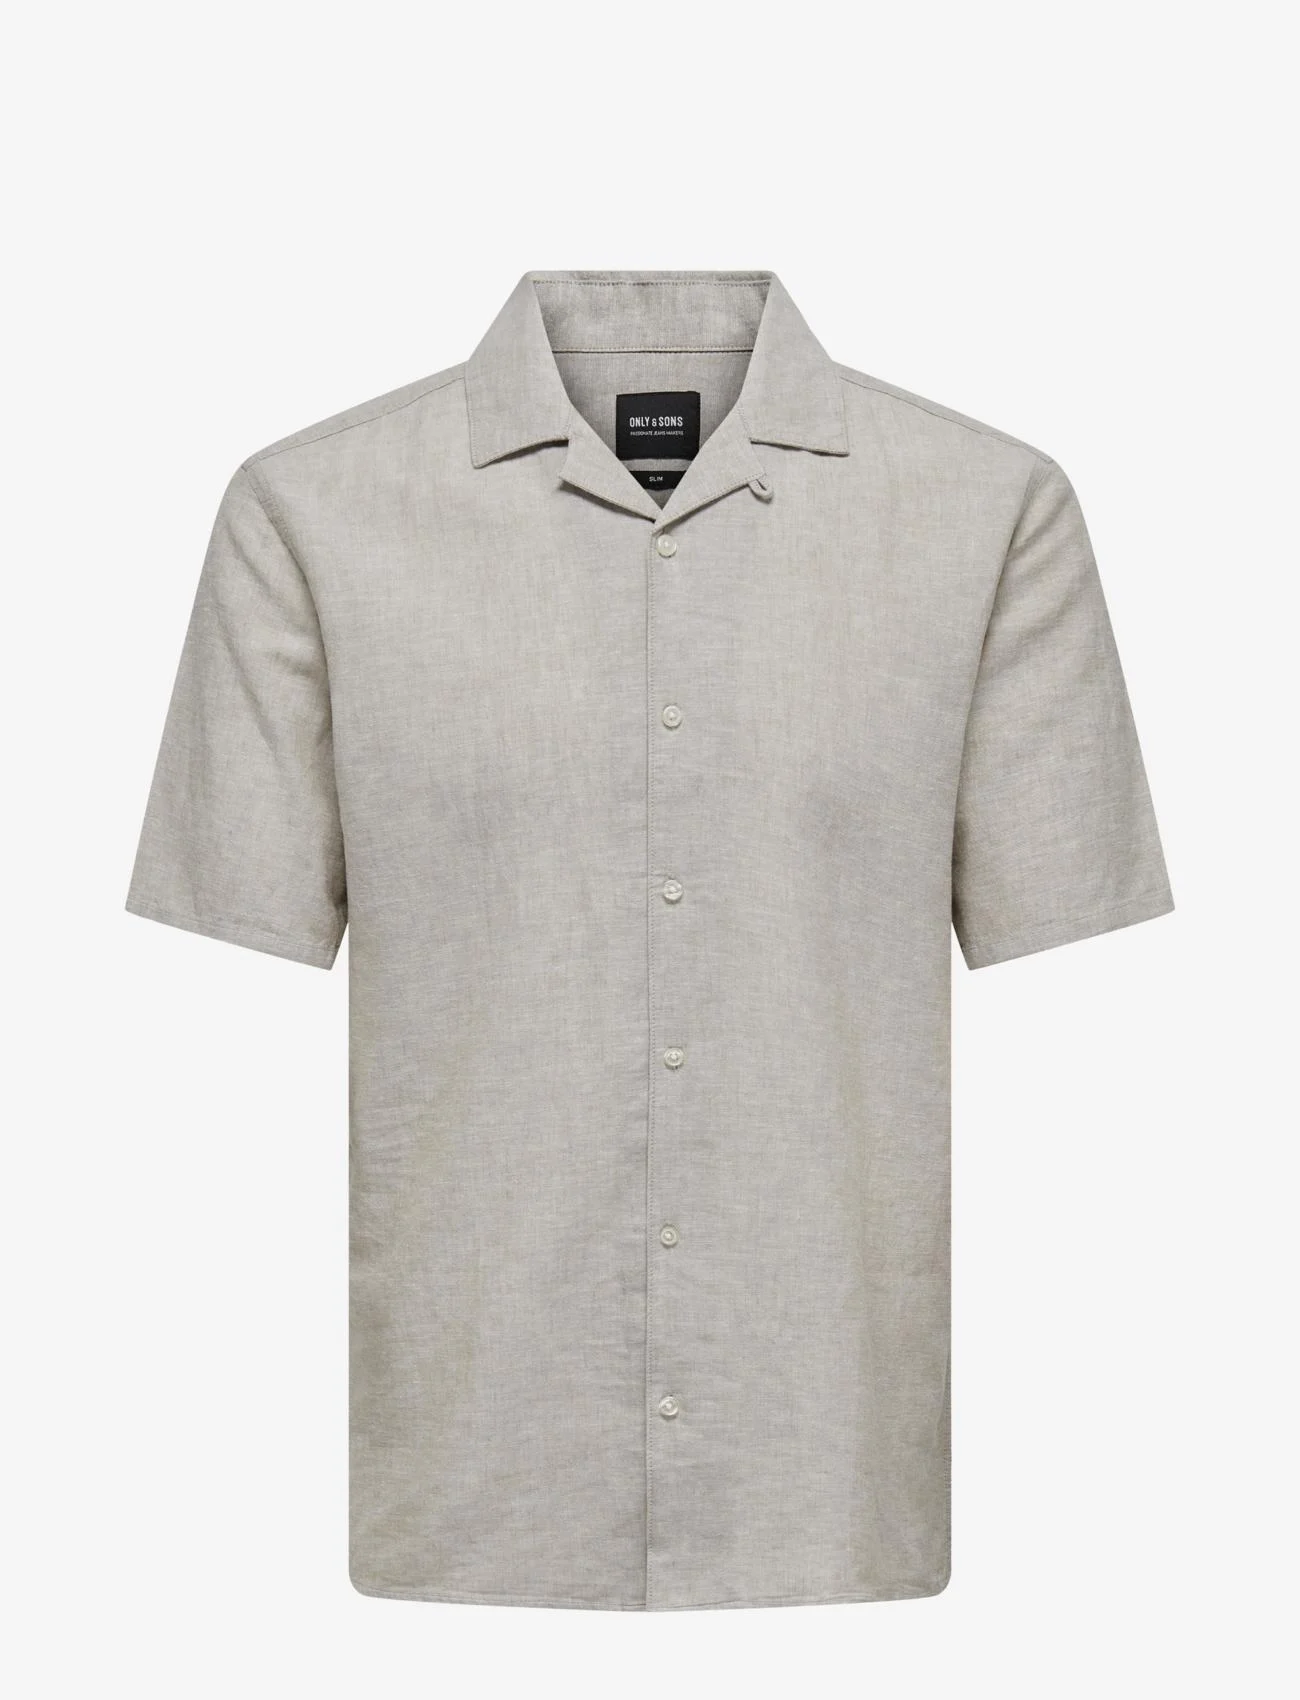 ONLY & SONS - ONSCAIDEN SS SOLID RESORT LINEN NOOS - linen shirts - chinchilla - 0